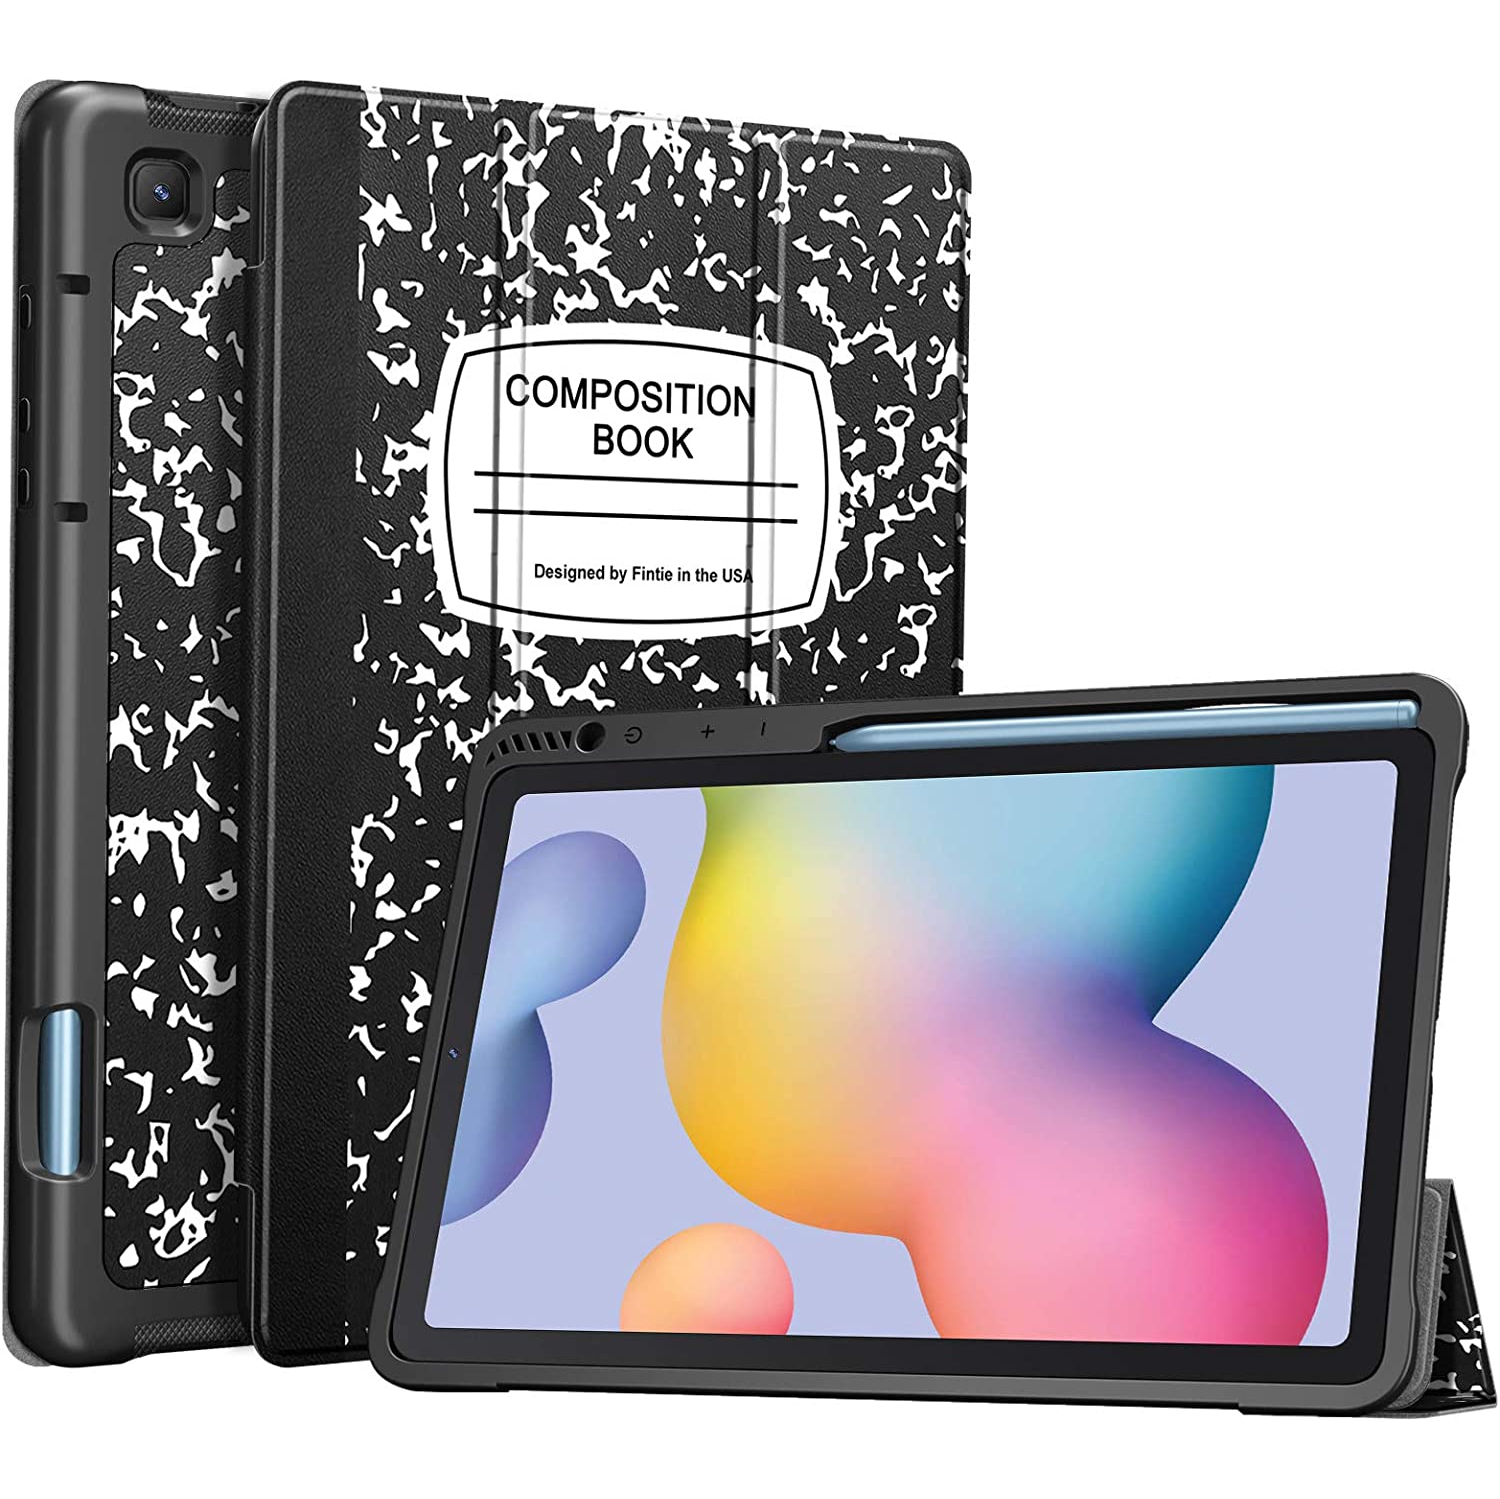 F Slim Case for Samsung Galaxy Tab S6 Lite 10.4 inch 2022/2020 Model (SM-P610/P613/P615/P619) with Built-in S Pen Holder, Soft TPU Smart Stand Back Cover Auto Wake/Sleep (Compositi